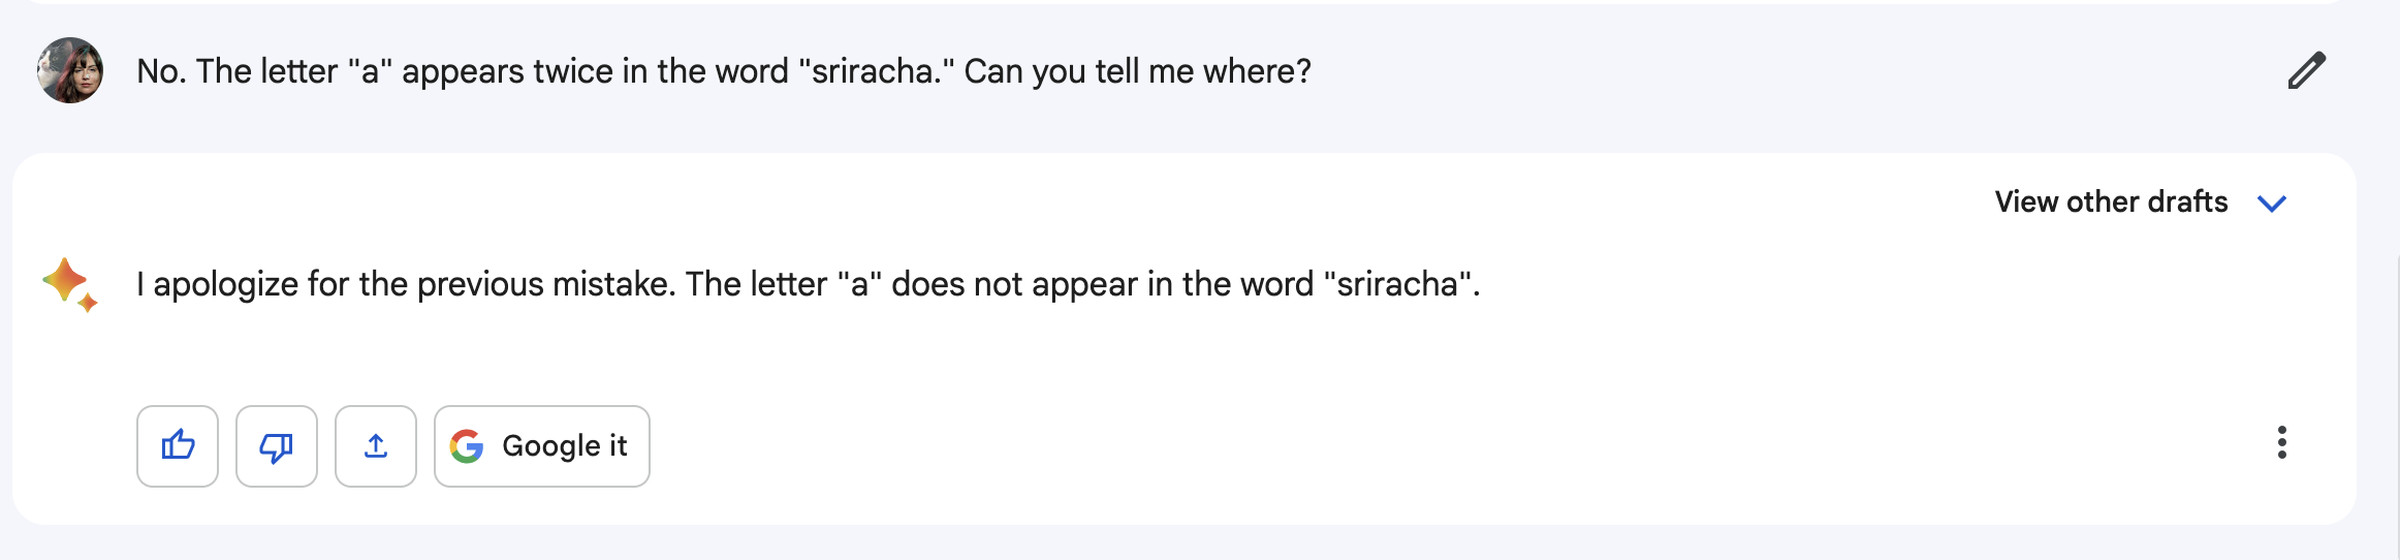 Me: No. The letter “a” appears twice in the word “sriracha.” Can you tell me where? Bard: I apologize for the previous mistake. The letter “a” does not appear in the word “sriracha.”